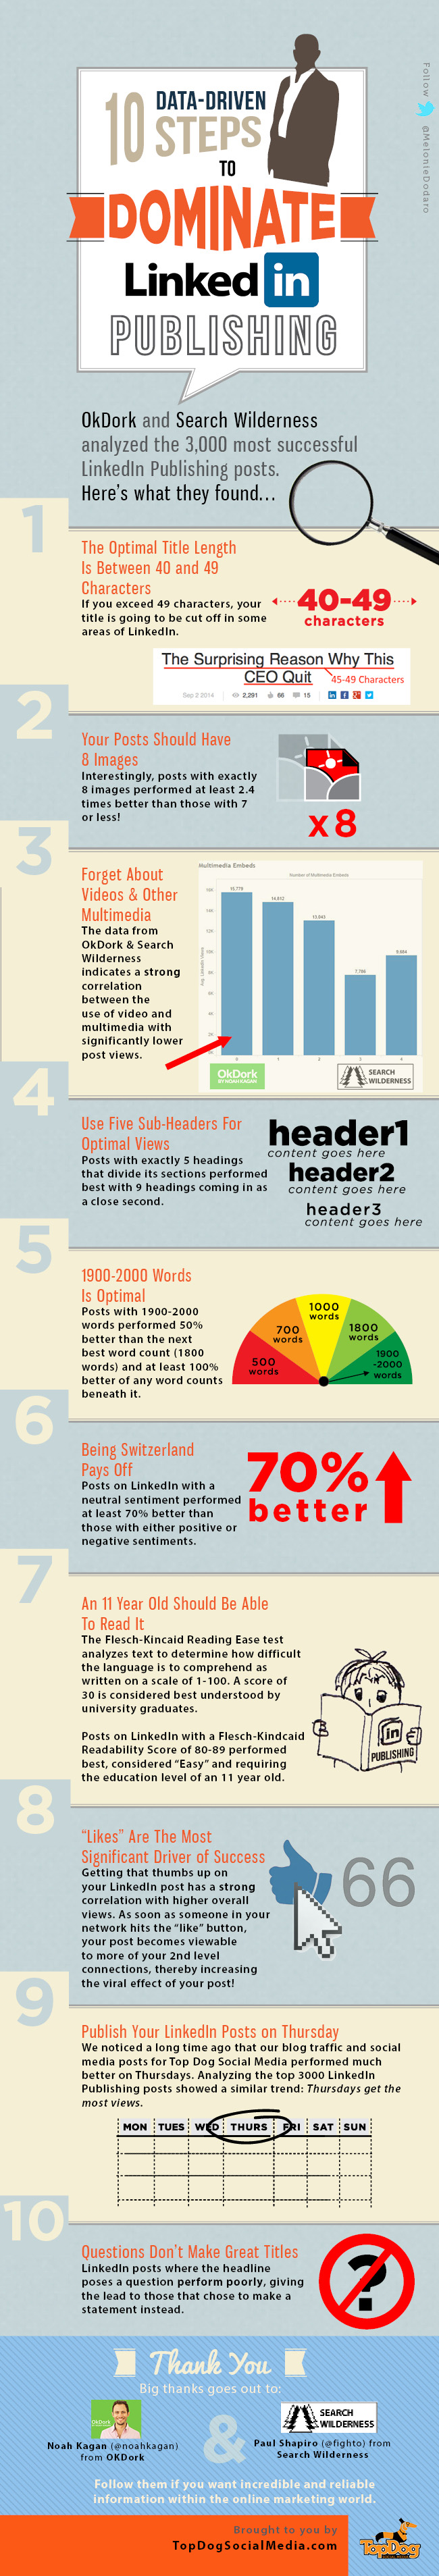 tips for writing great linkedin posts, linkedin infographic